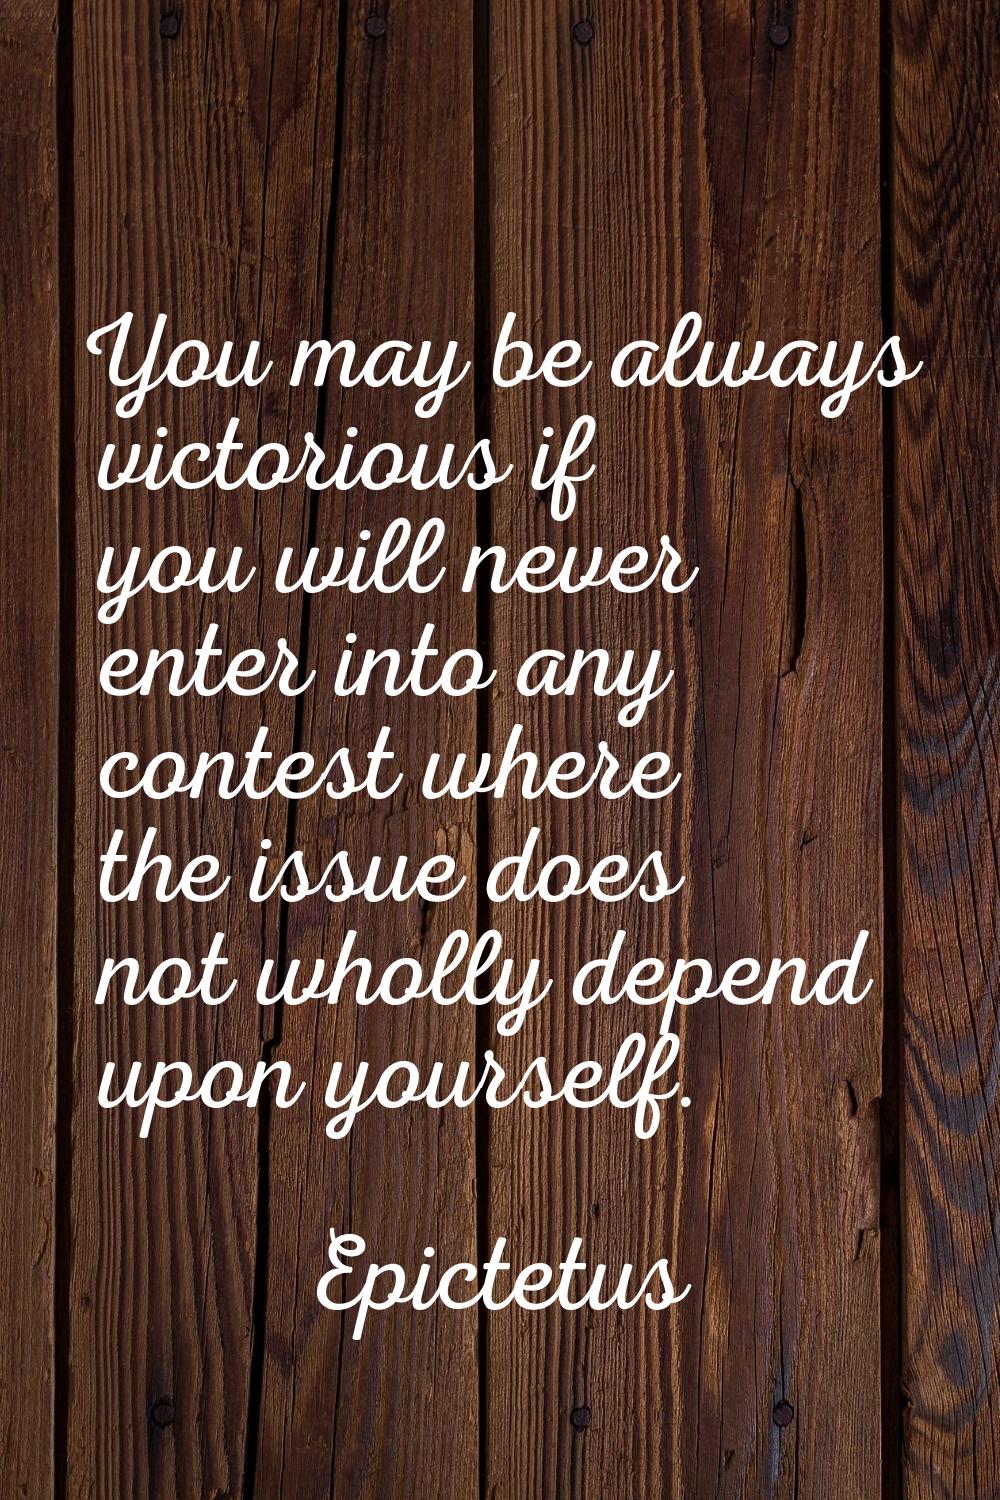 You may be always victorious if you will never enter into any contest where the issue does not whol